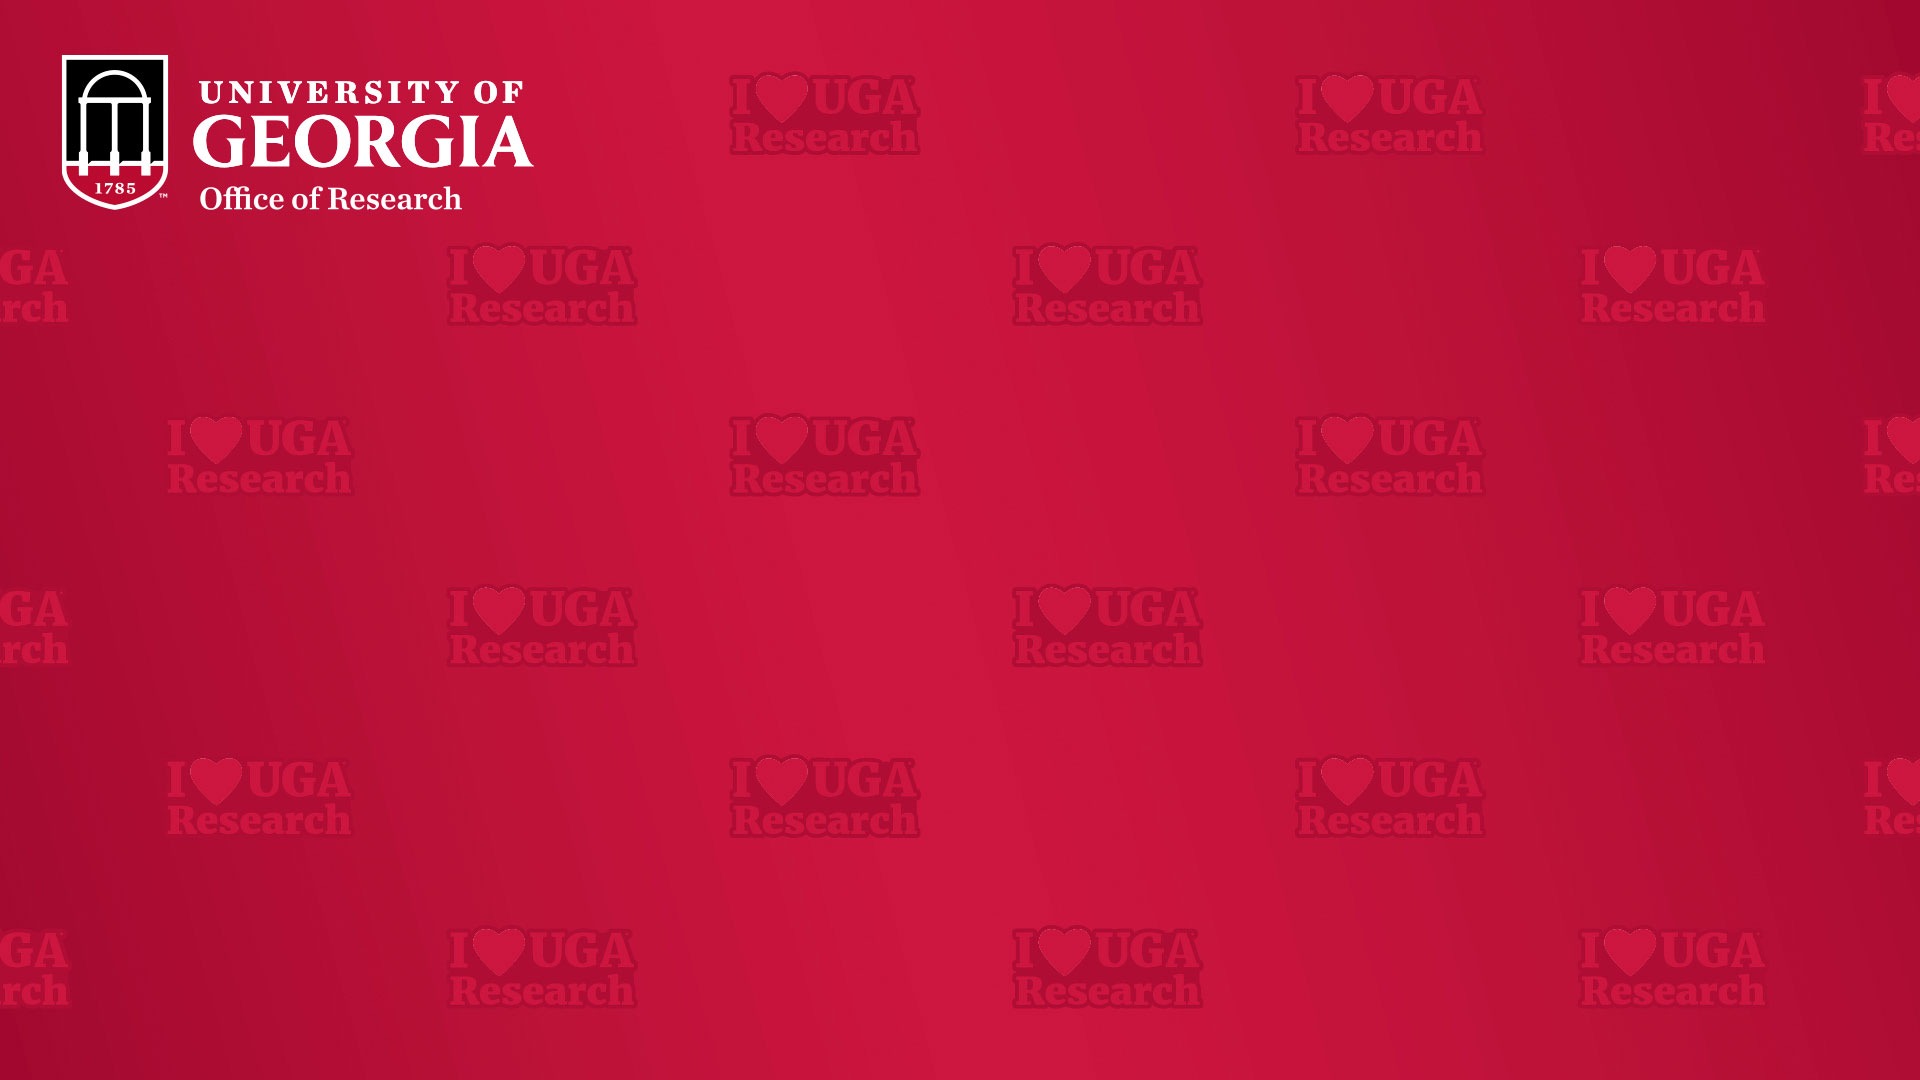 Step and repeat banner of I love UGA Research with University of Georgia Office of Research logo